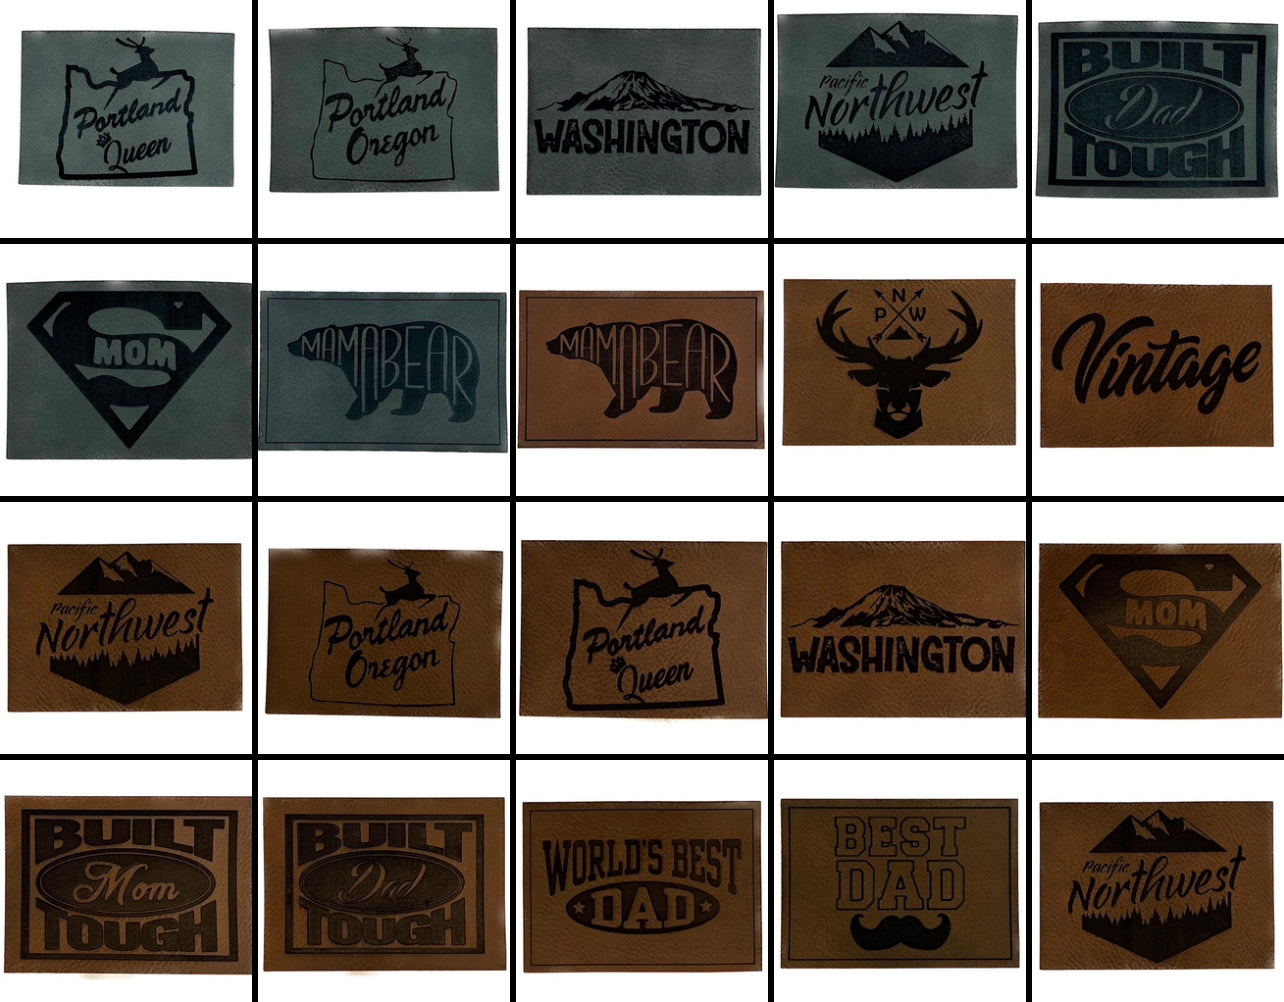 Pricing For Custom LEATHER Patches